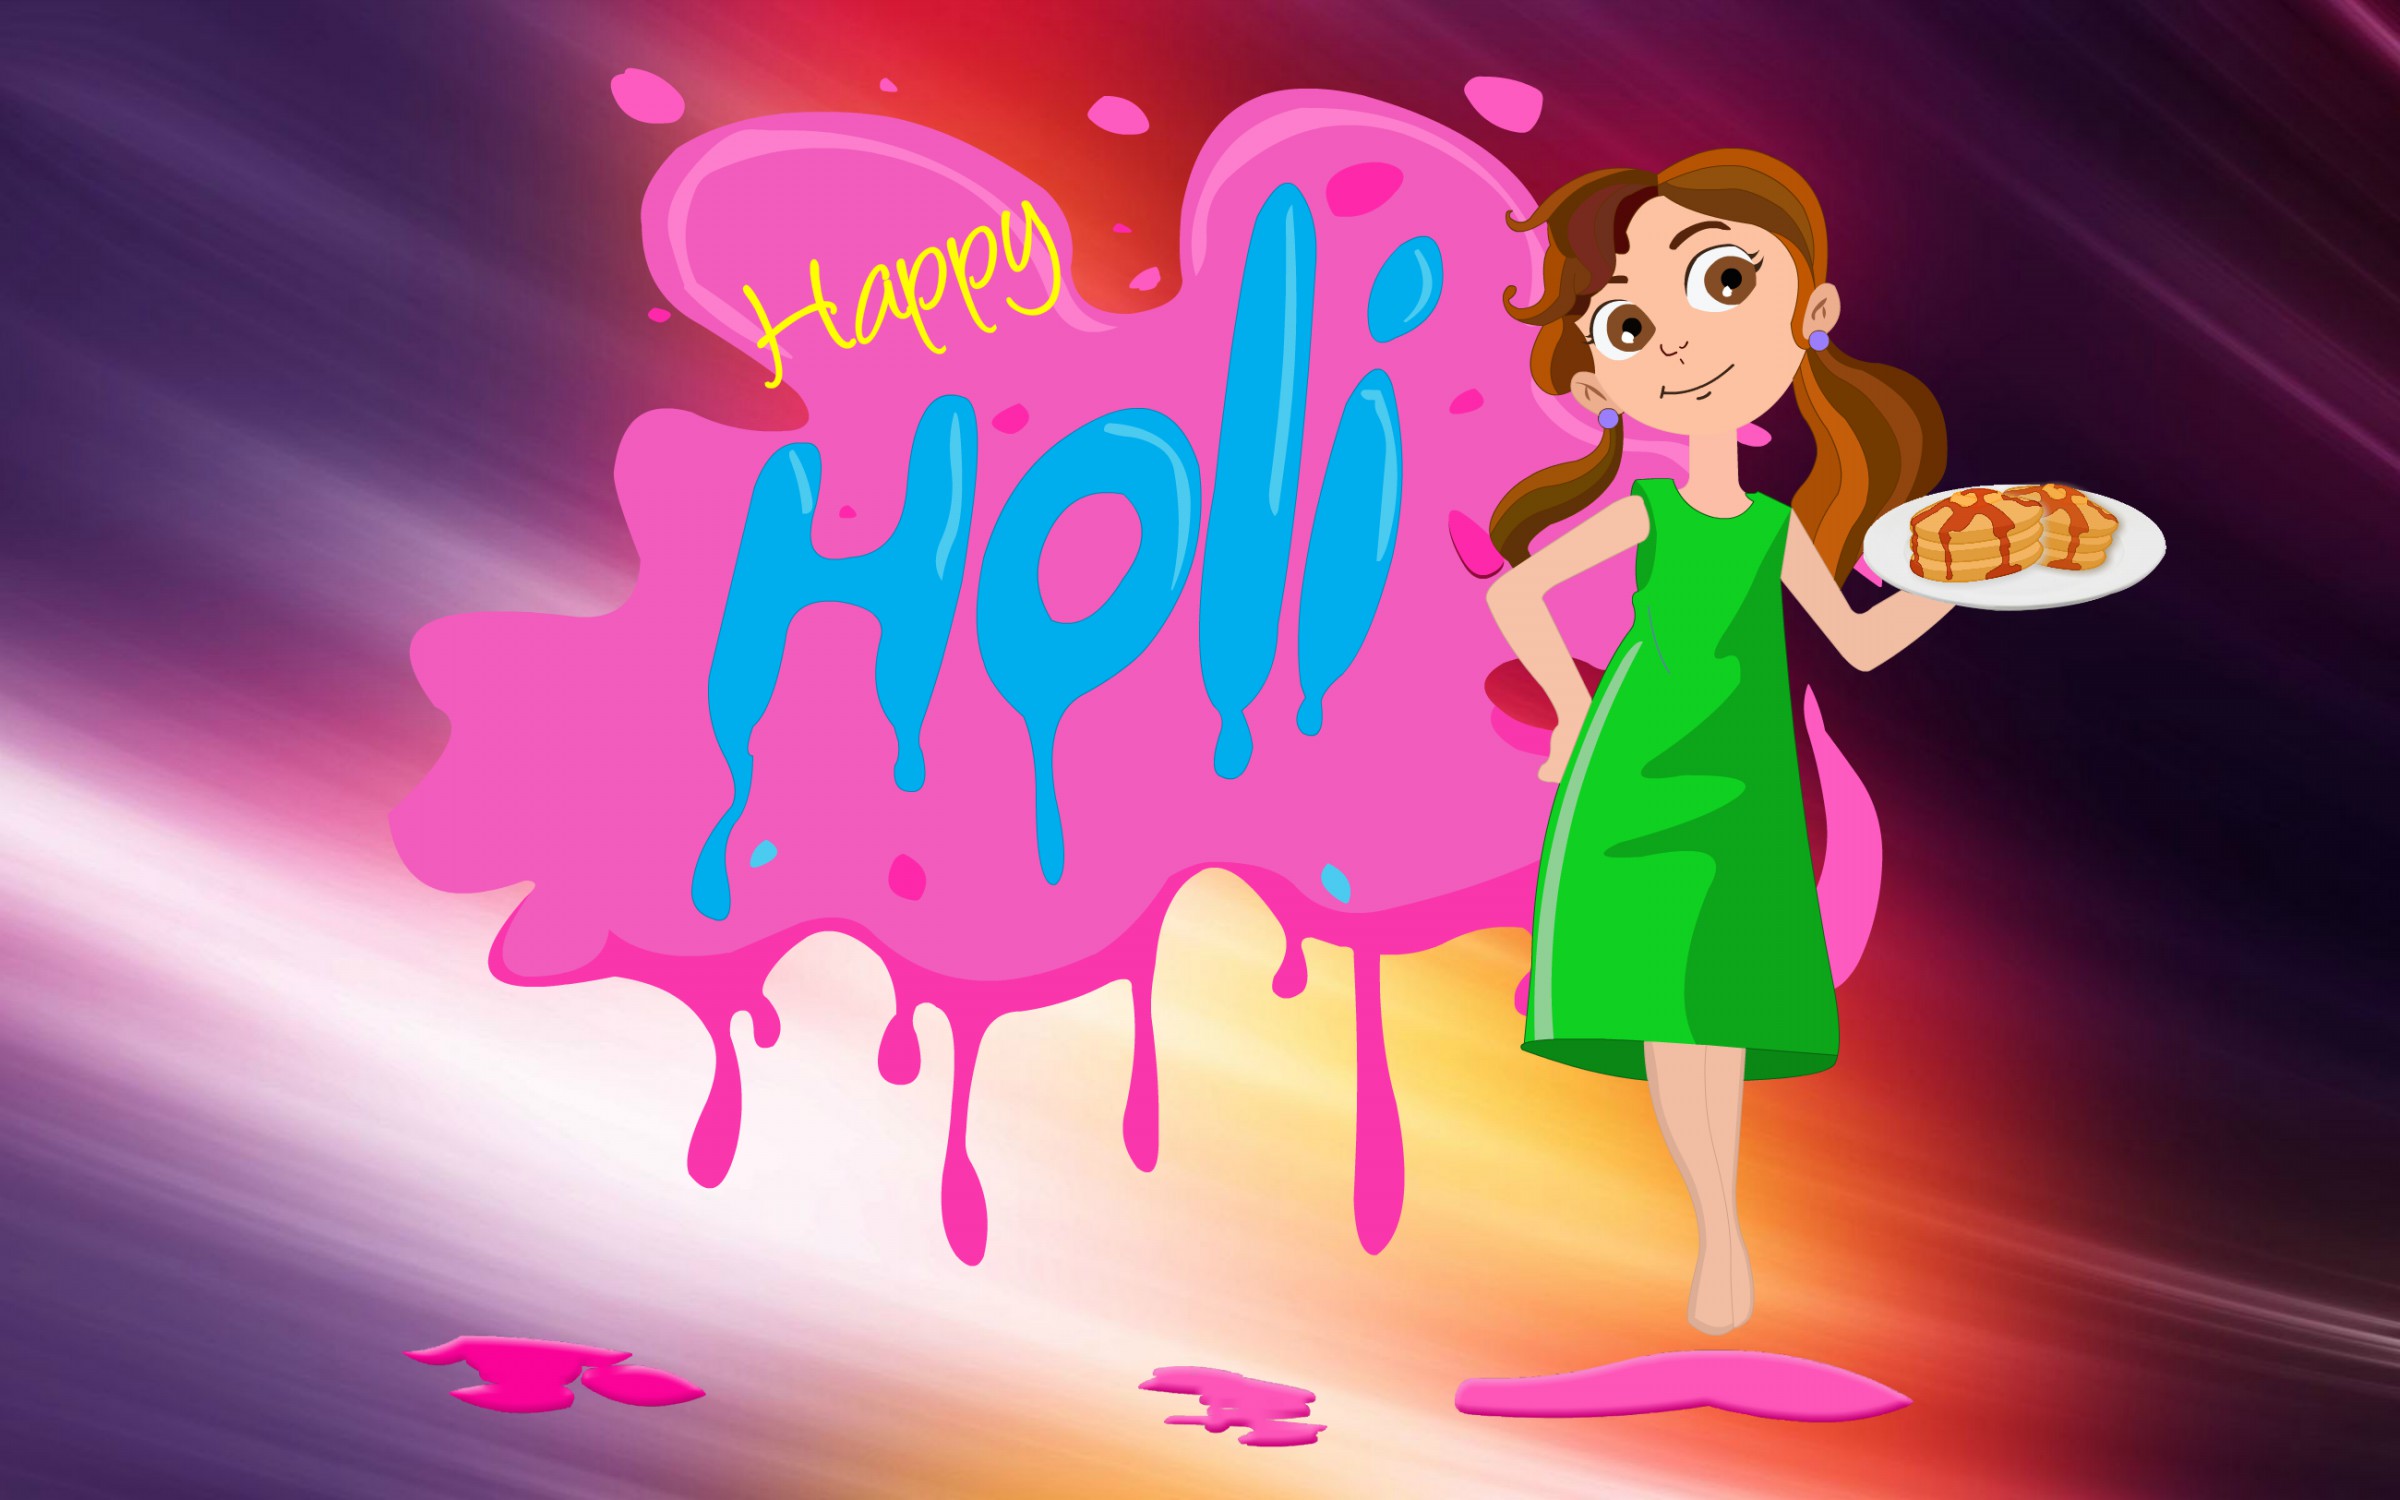 colorful happy holi free awesome image for mobile